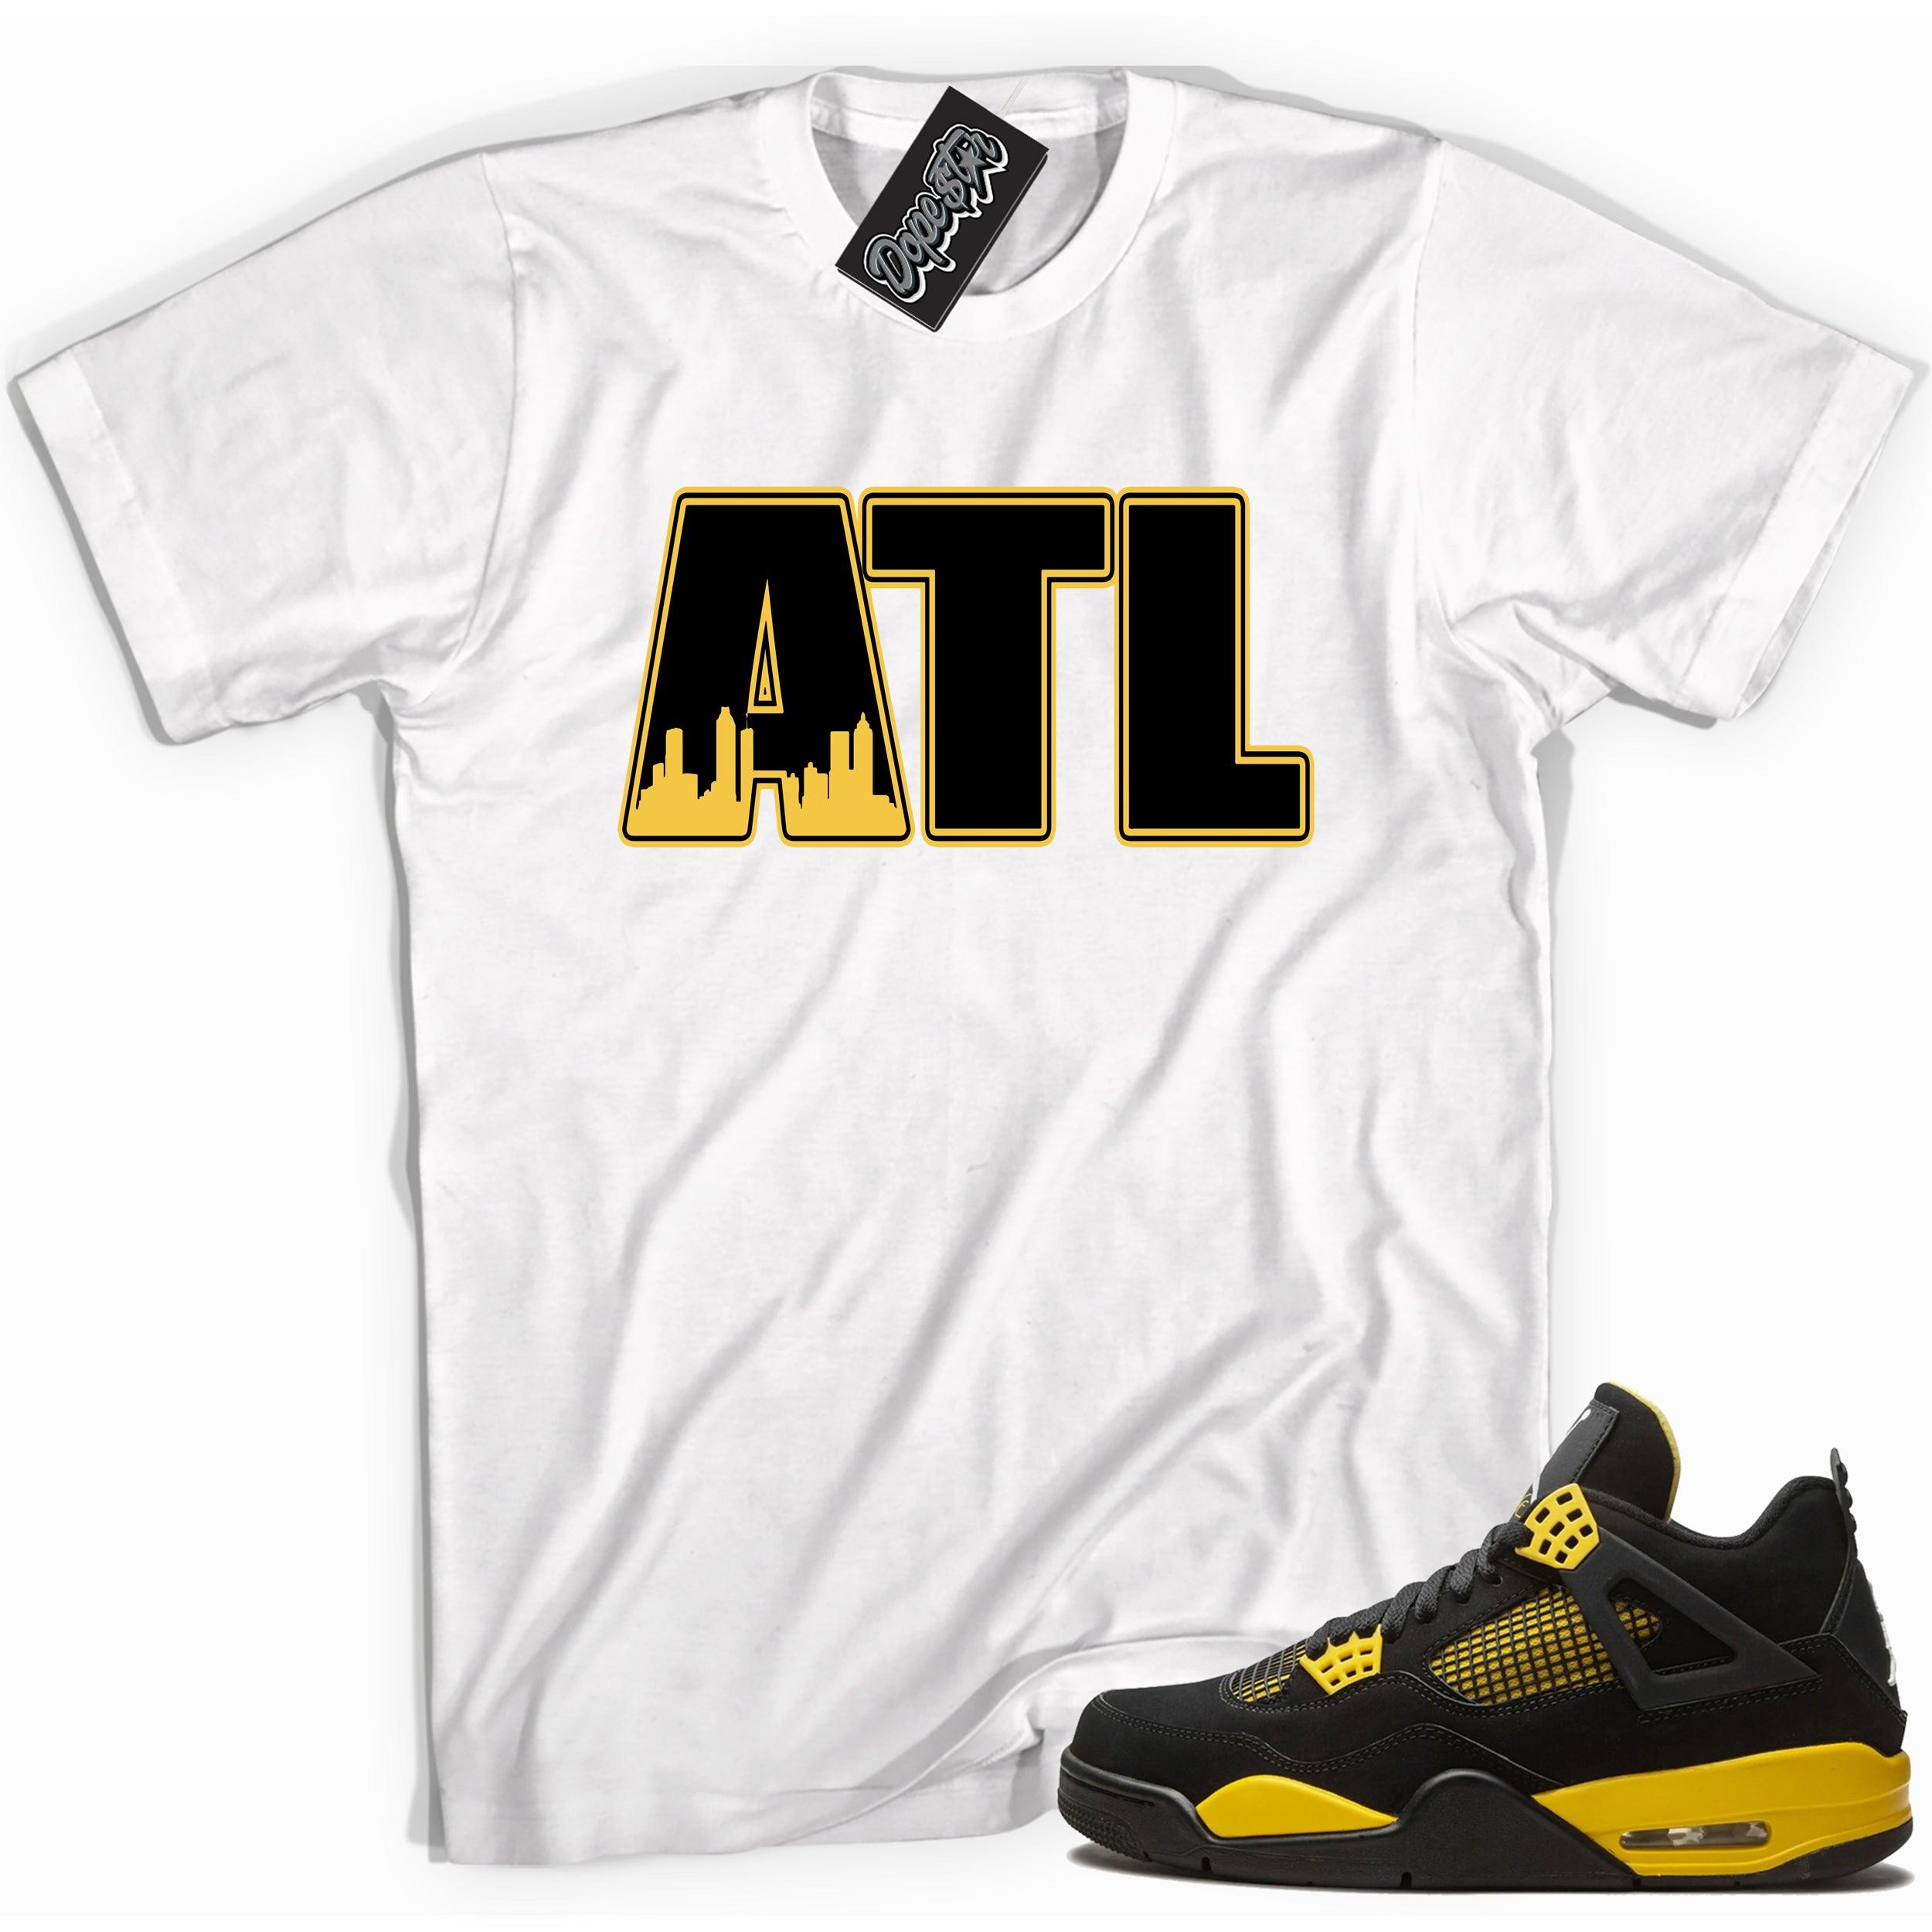 Cool white graphic tee with 'ATL Atlanta' print, that perfectly matches Air Jordan 4 Thunder sneakers